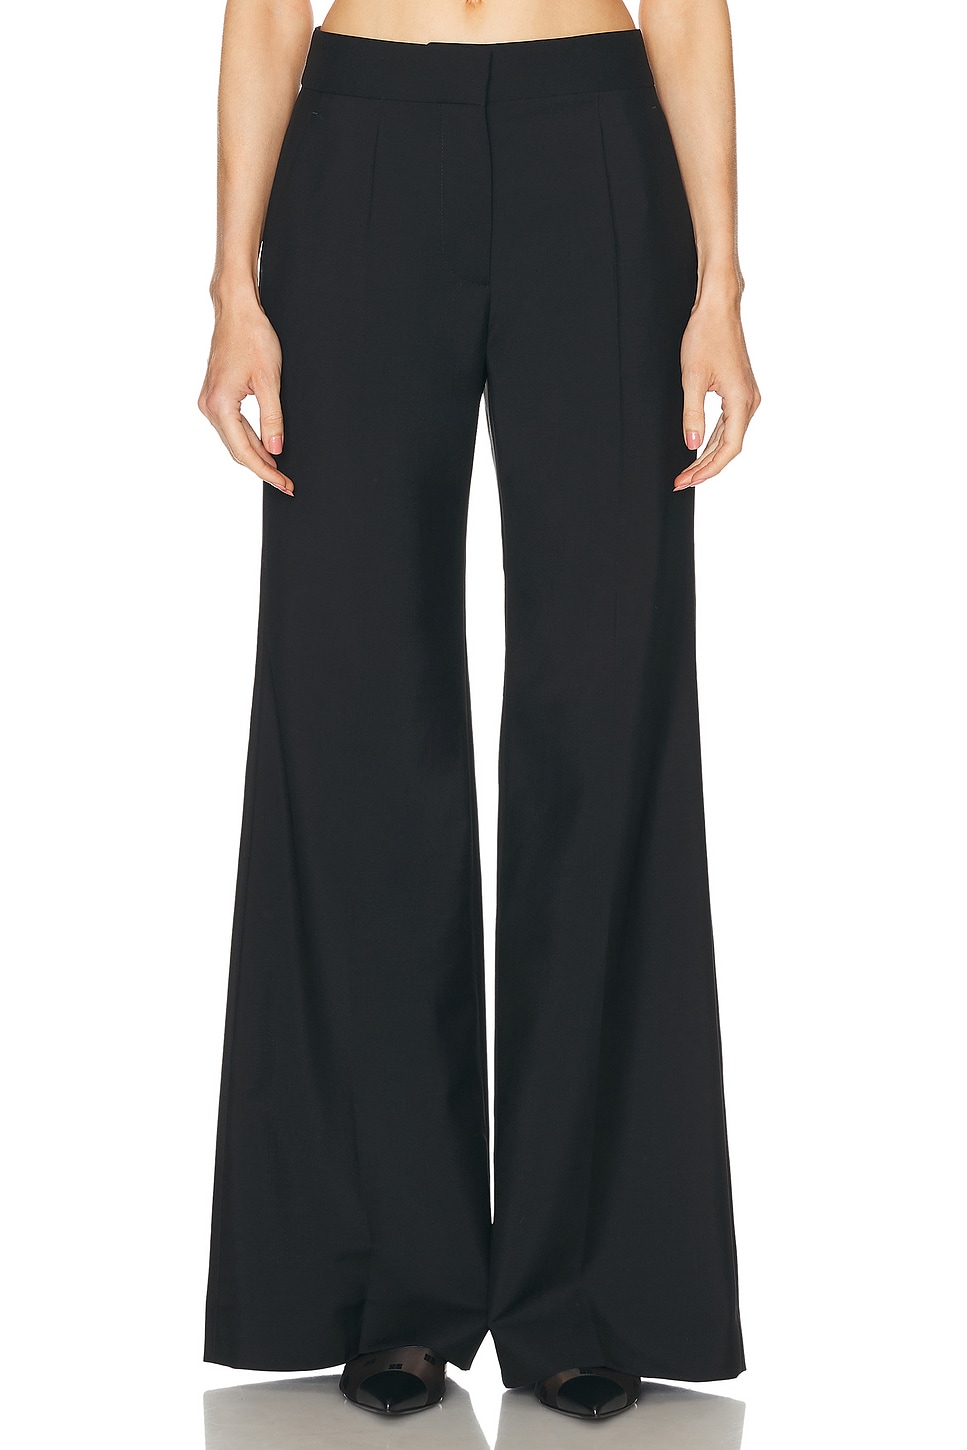 Image 1 of Givenchy Flare Tailored Pant in Black